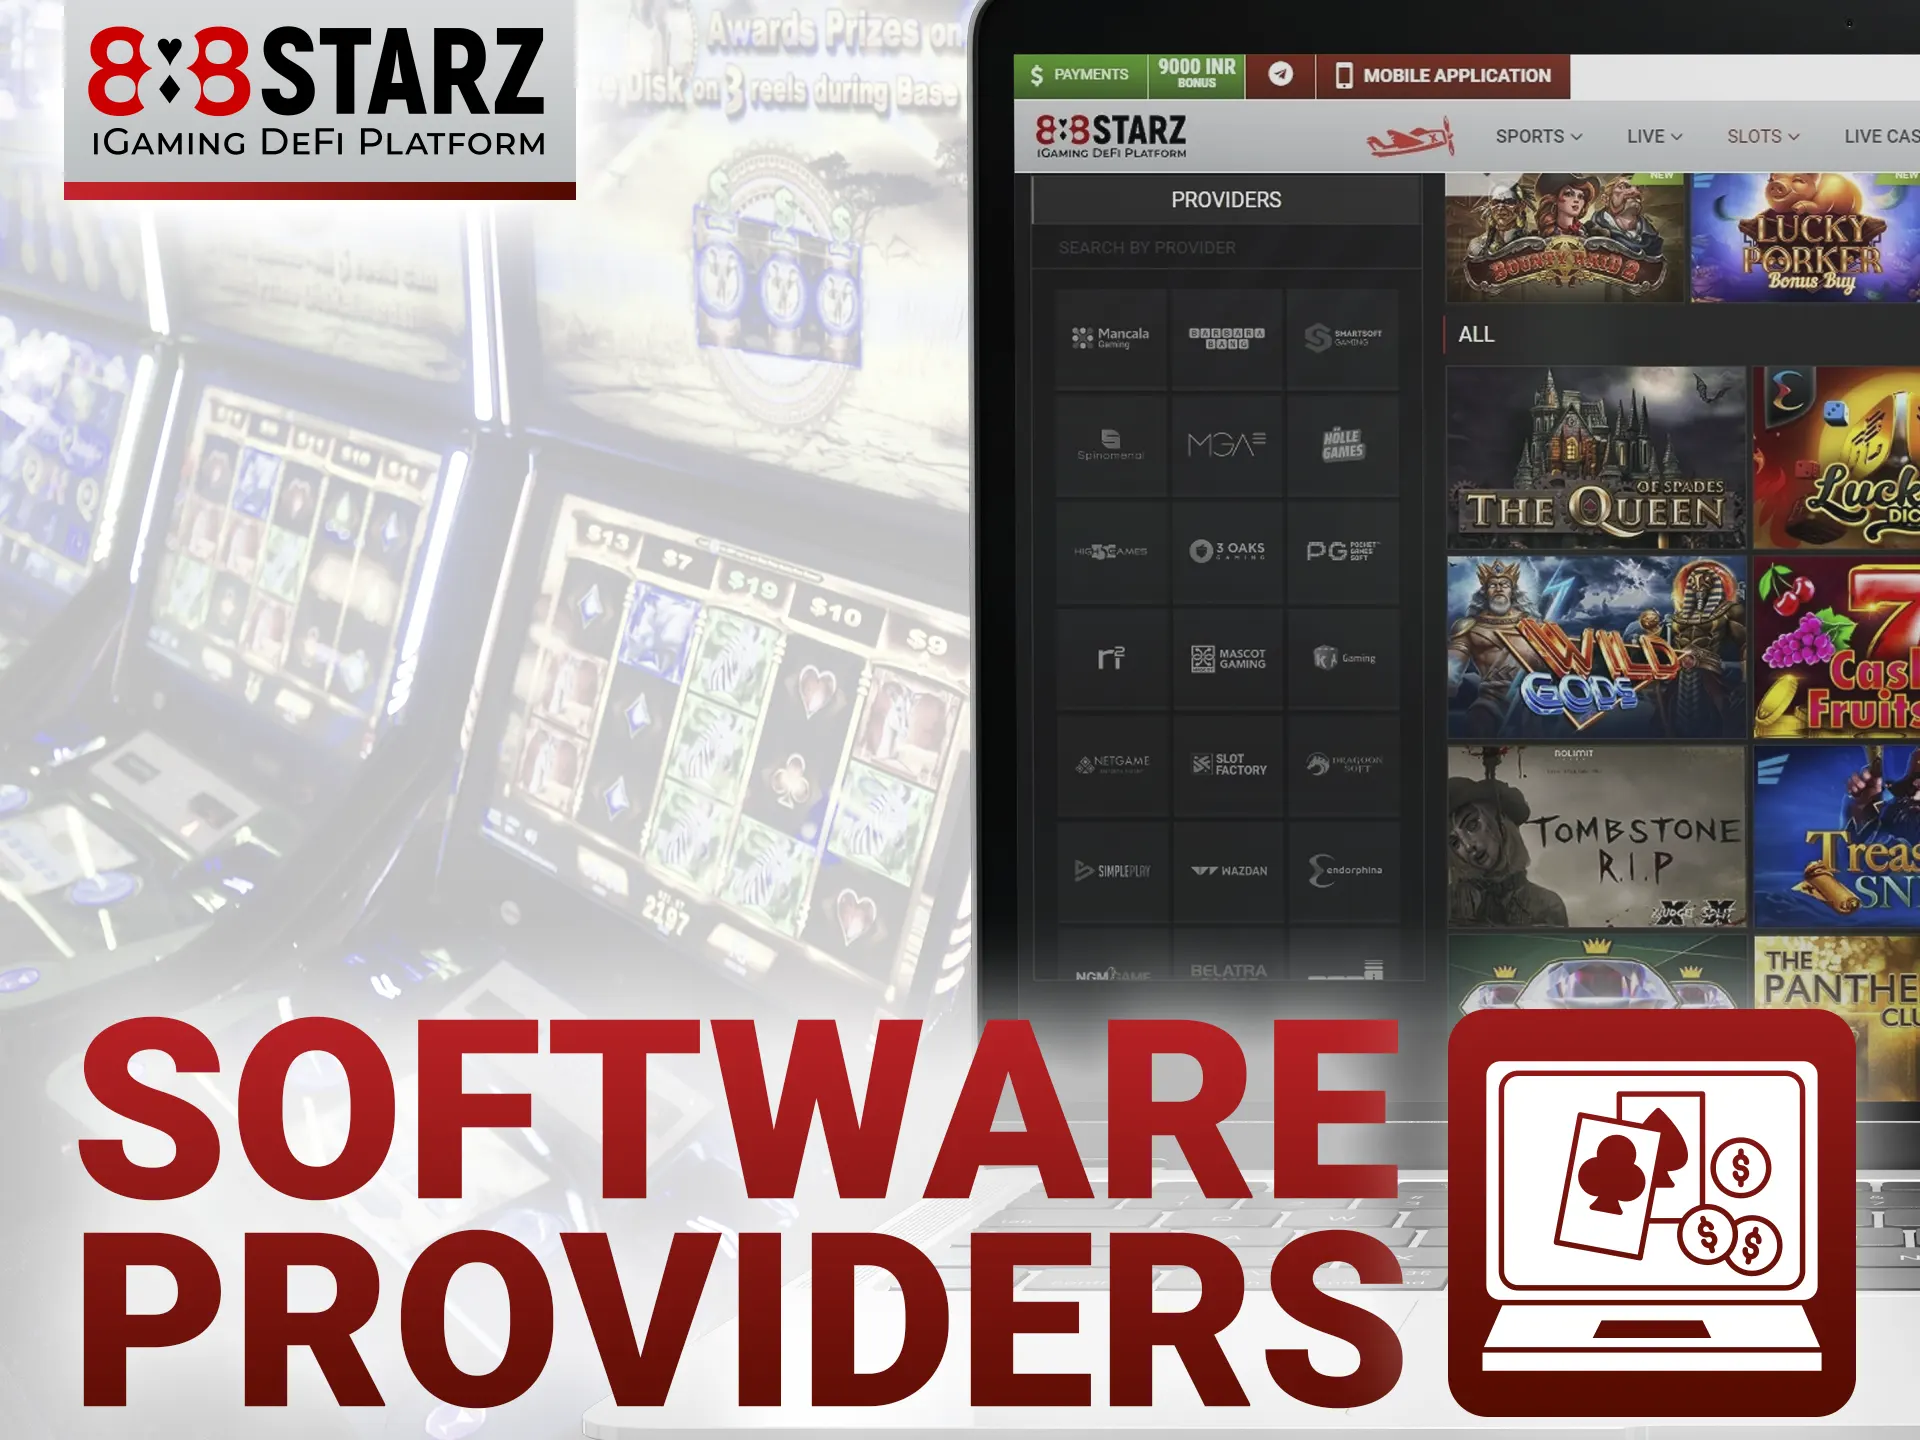 At 888starz casino you can play games from trusted gambling providers.